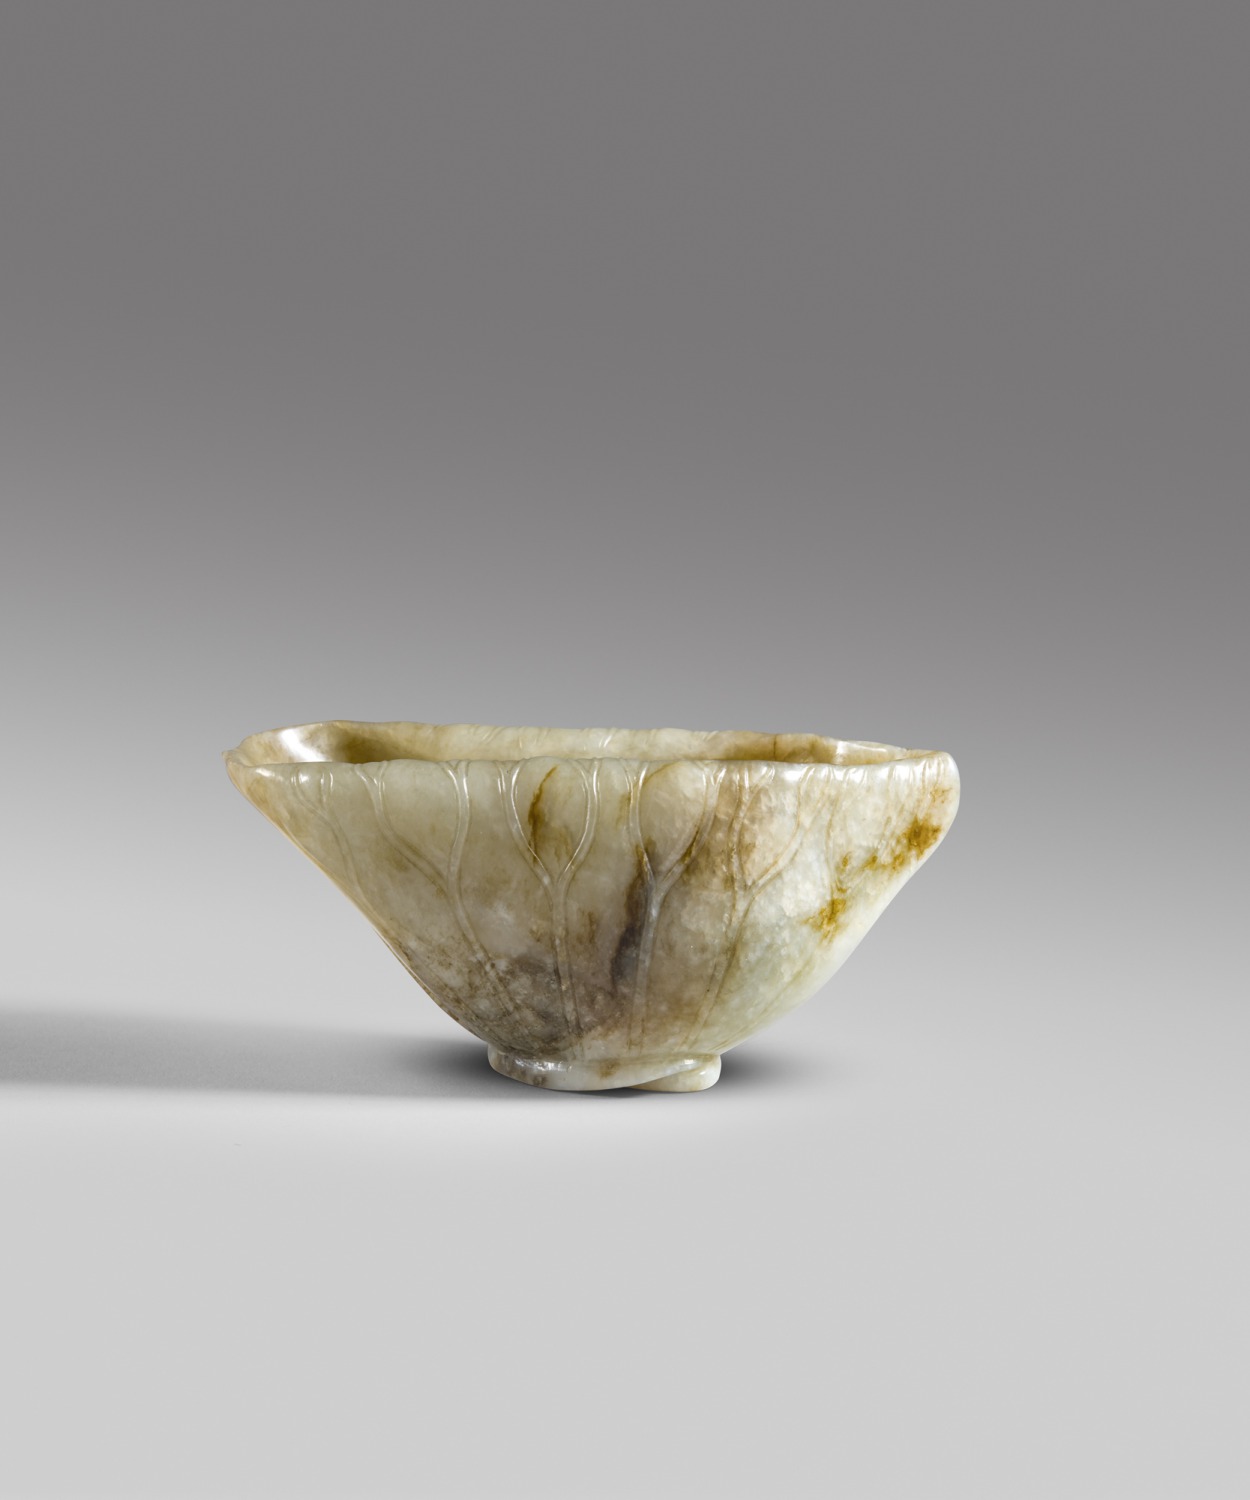 Chinese Ceramics and Works of Art - Asian Art in London 2022 (8)